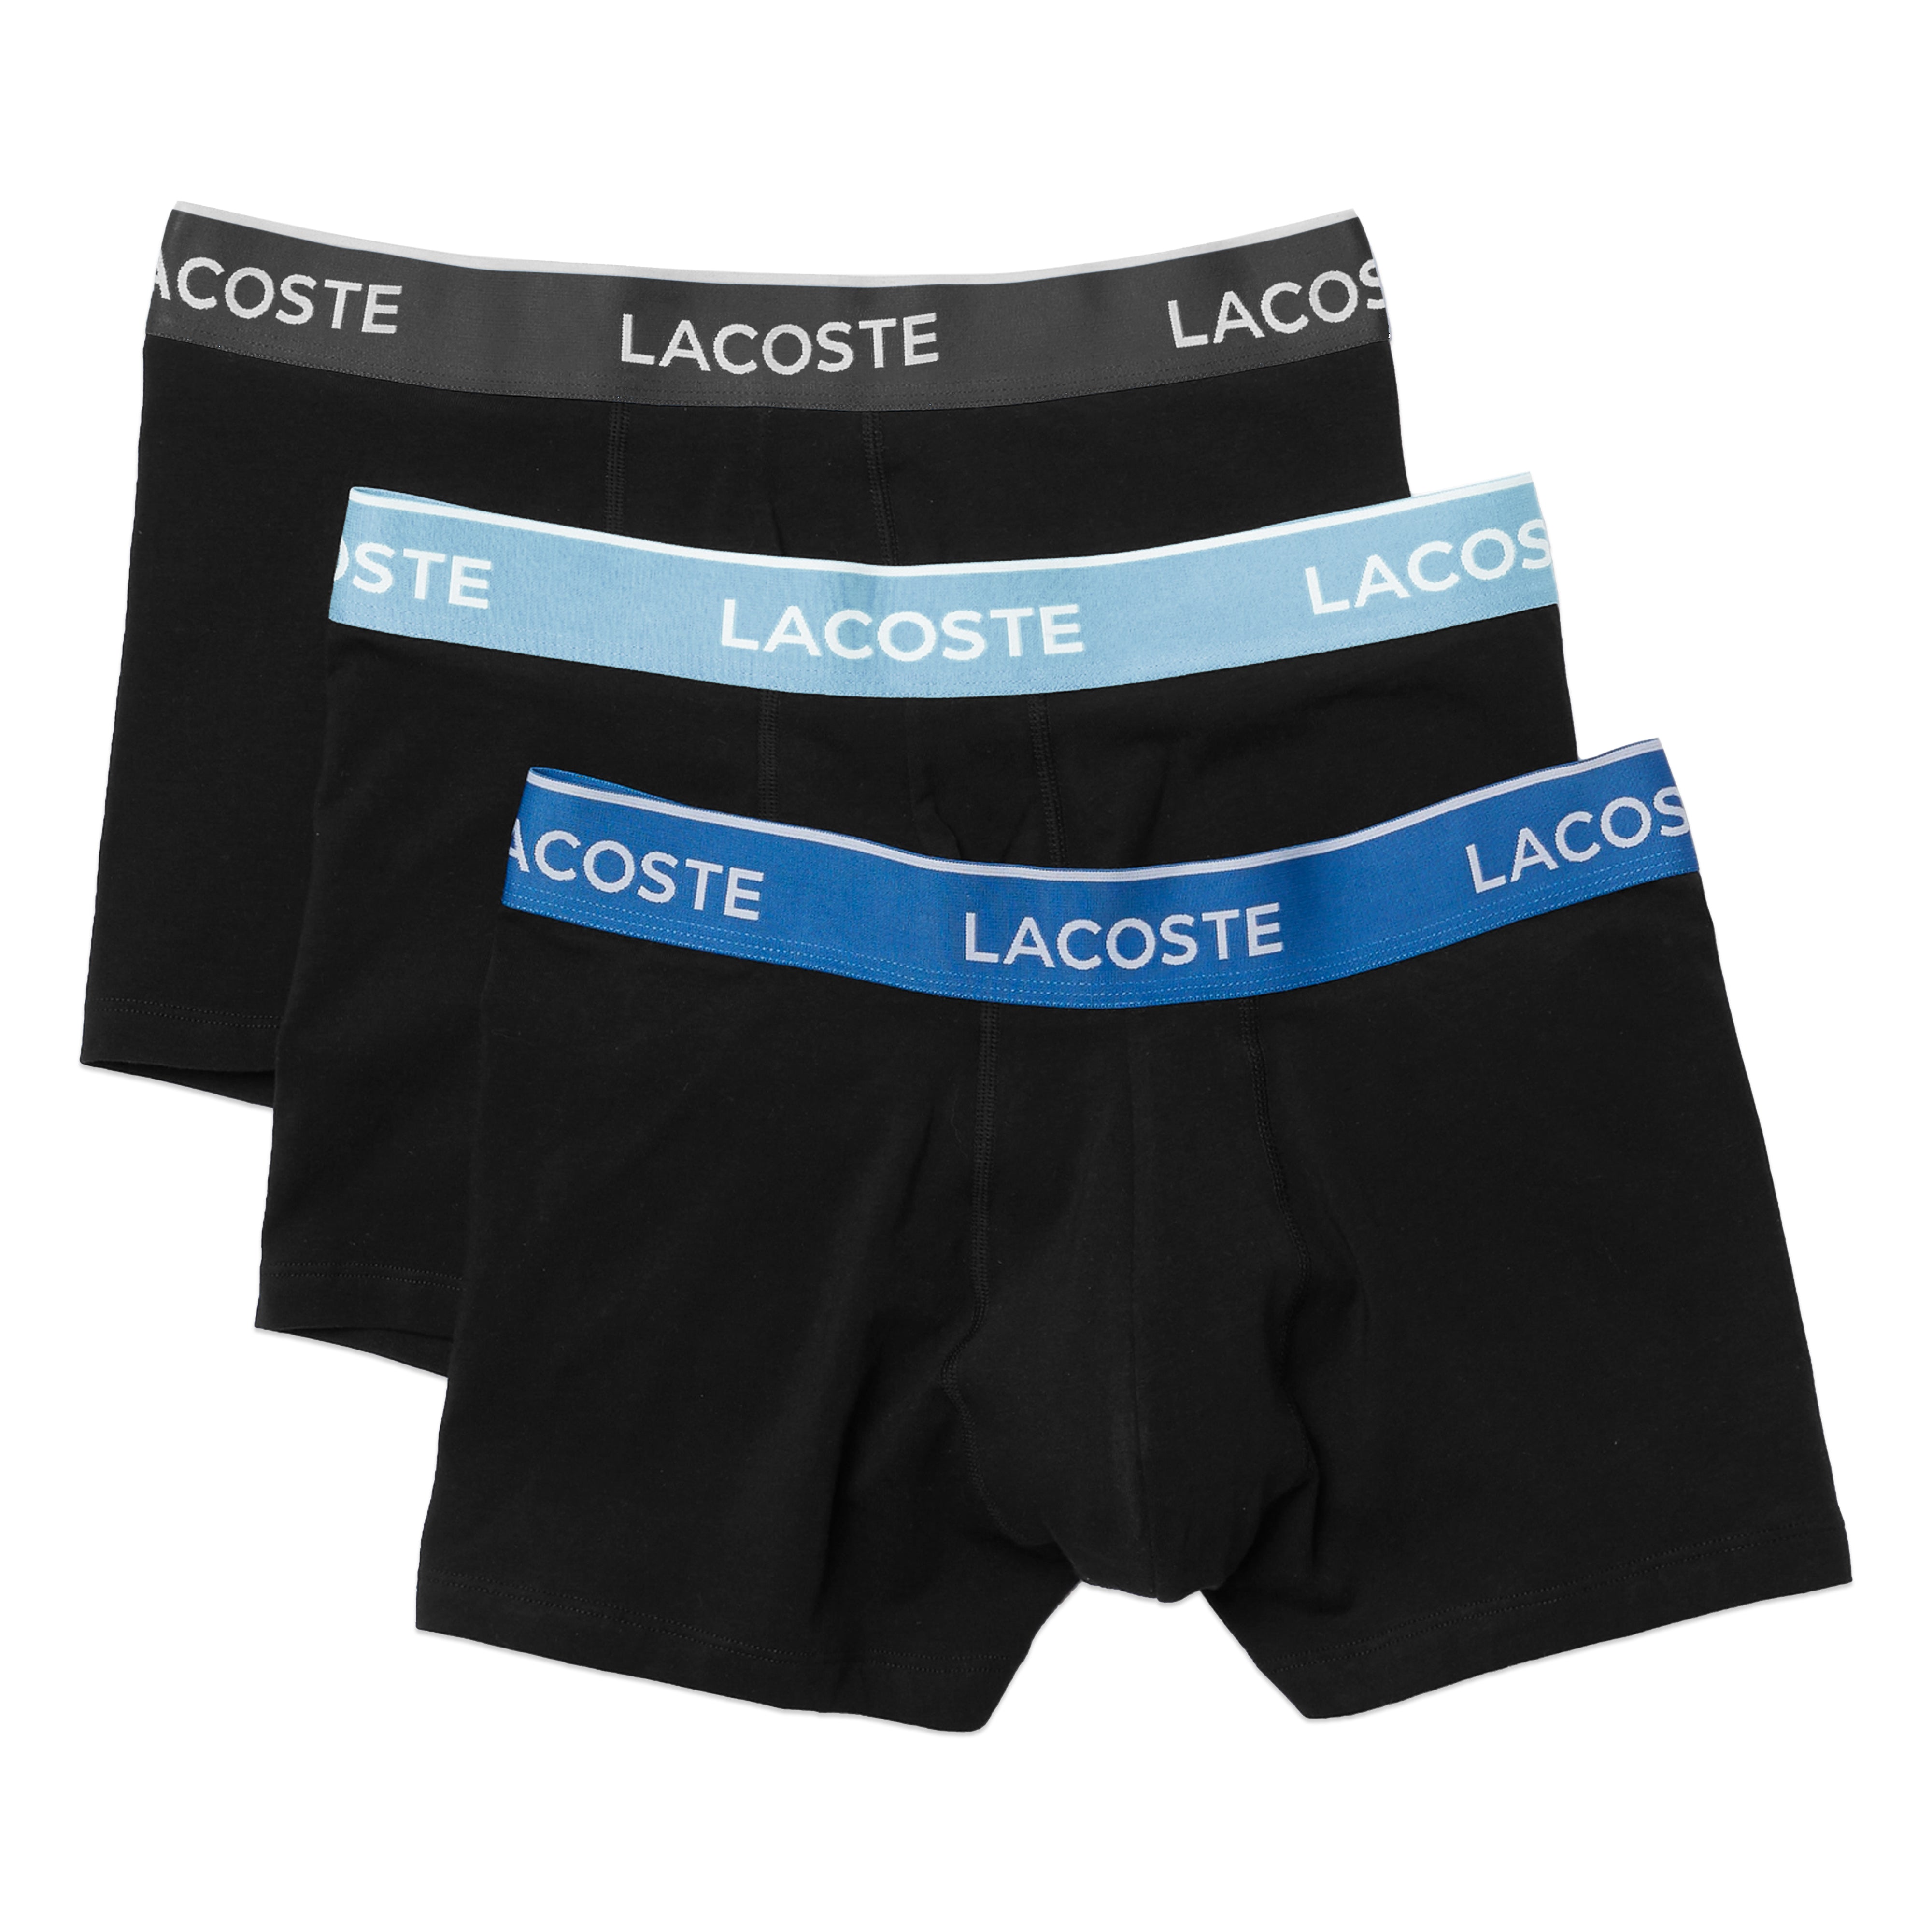 Lacoste 3 Pack Cotton Stretch Trunks 5H3401 - Black with Blue/Sky Blue